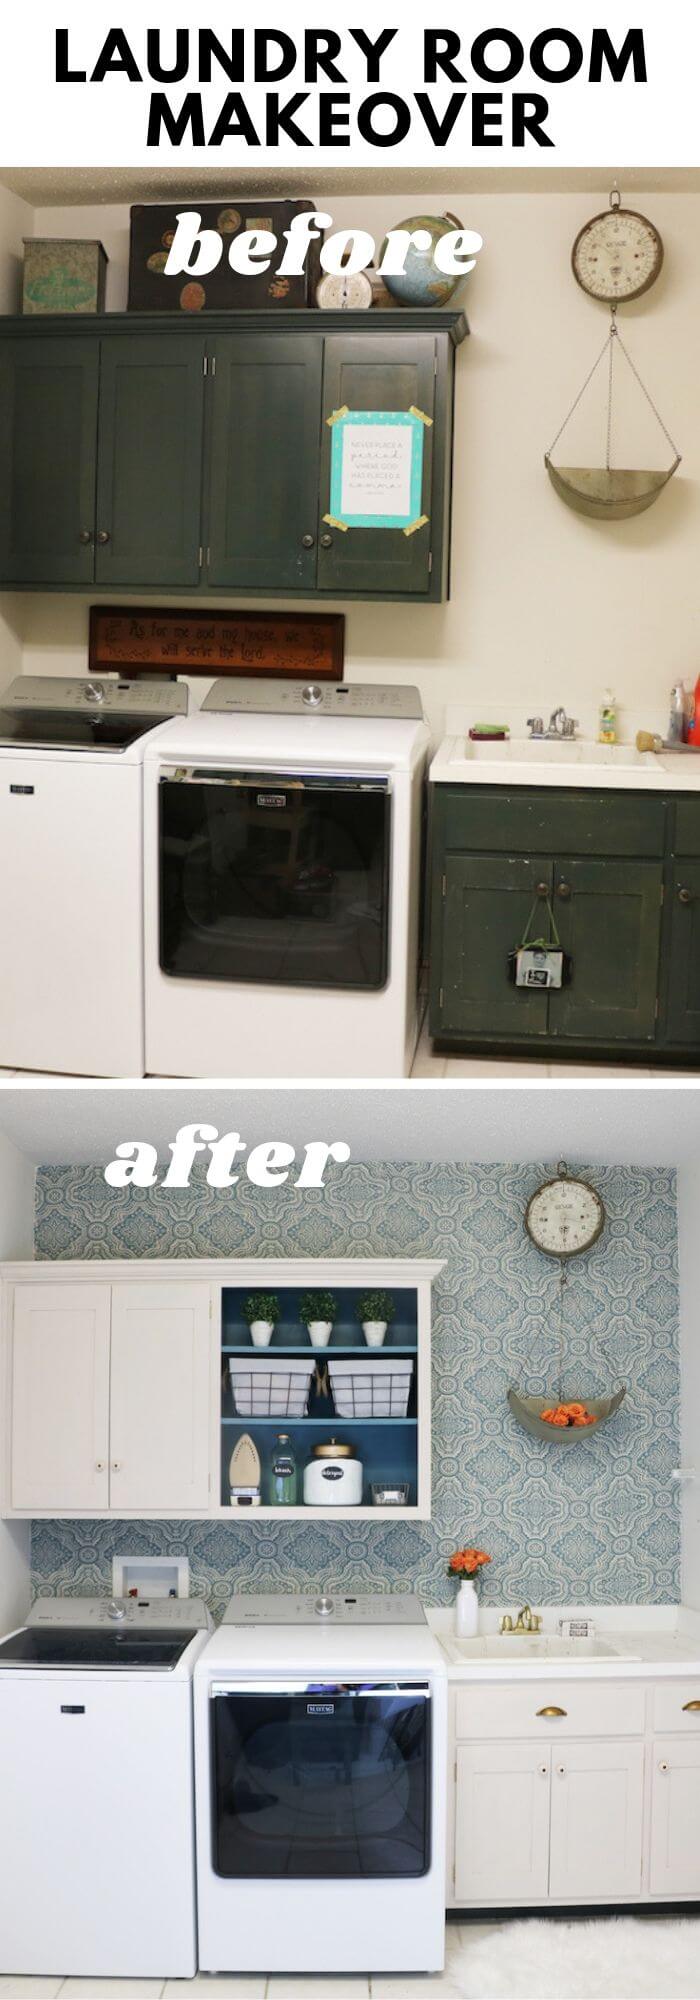 The Linen cabinets with fabric wall